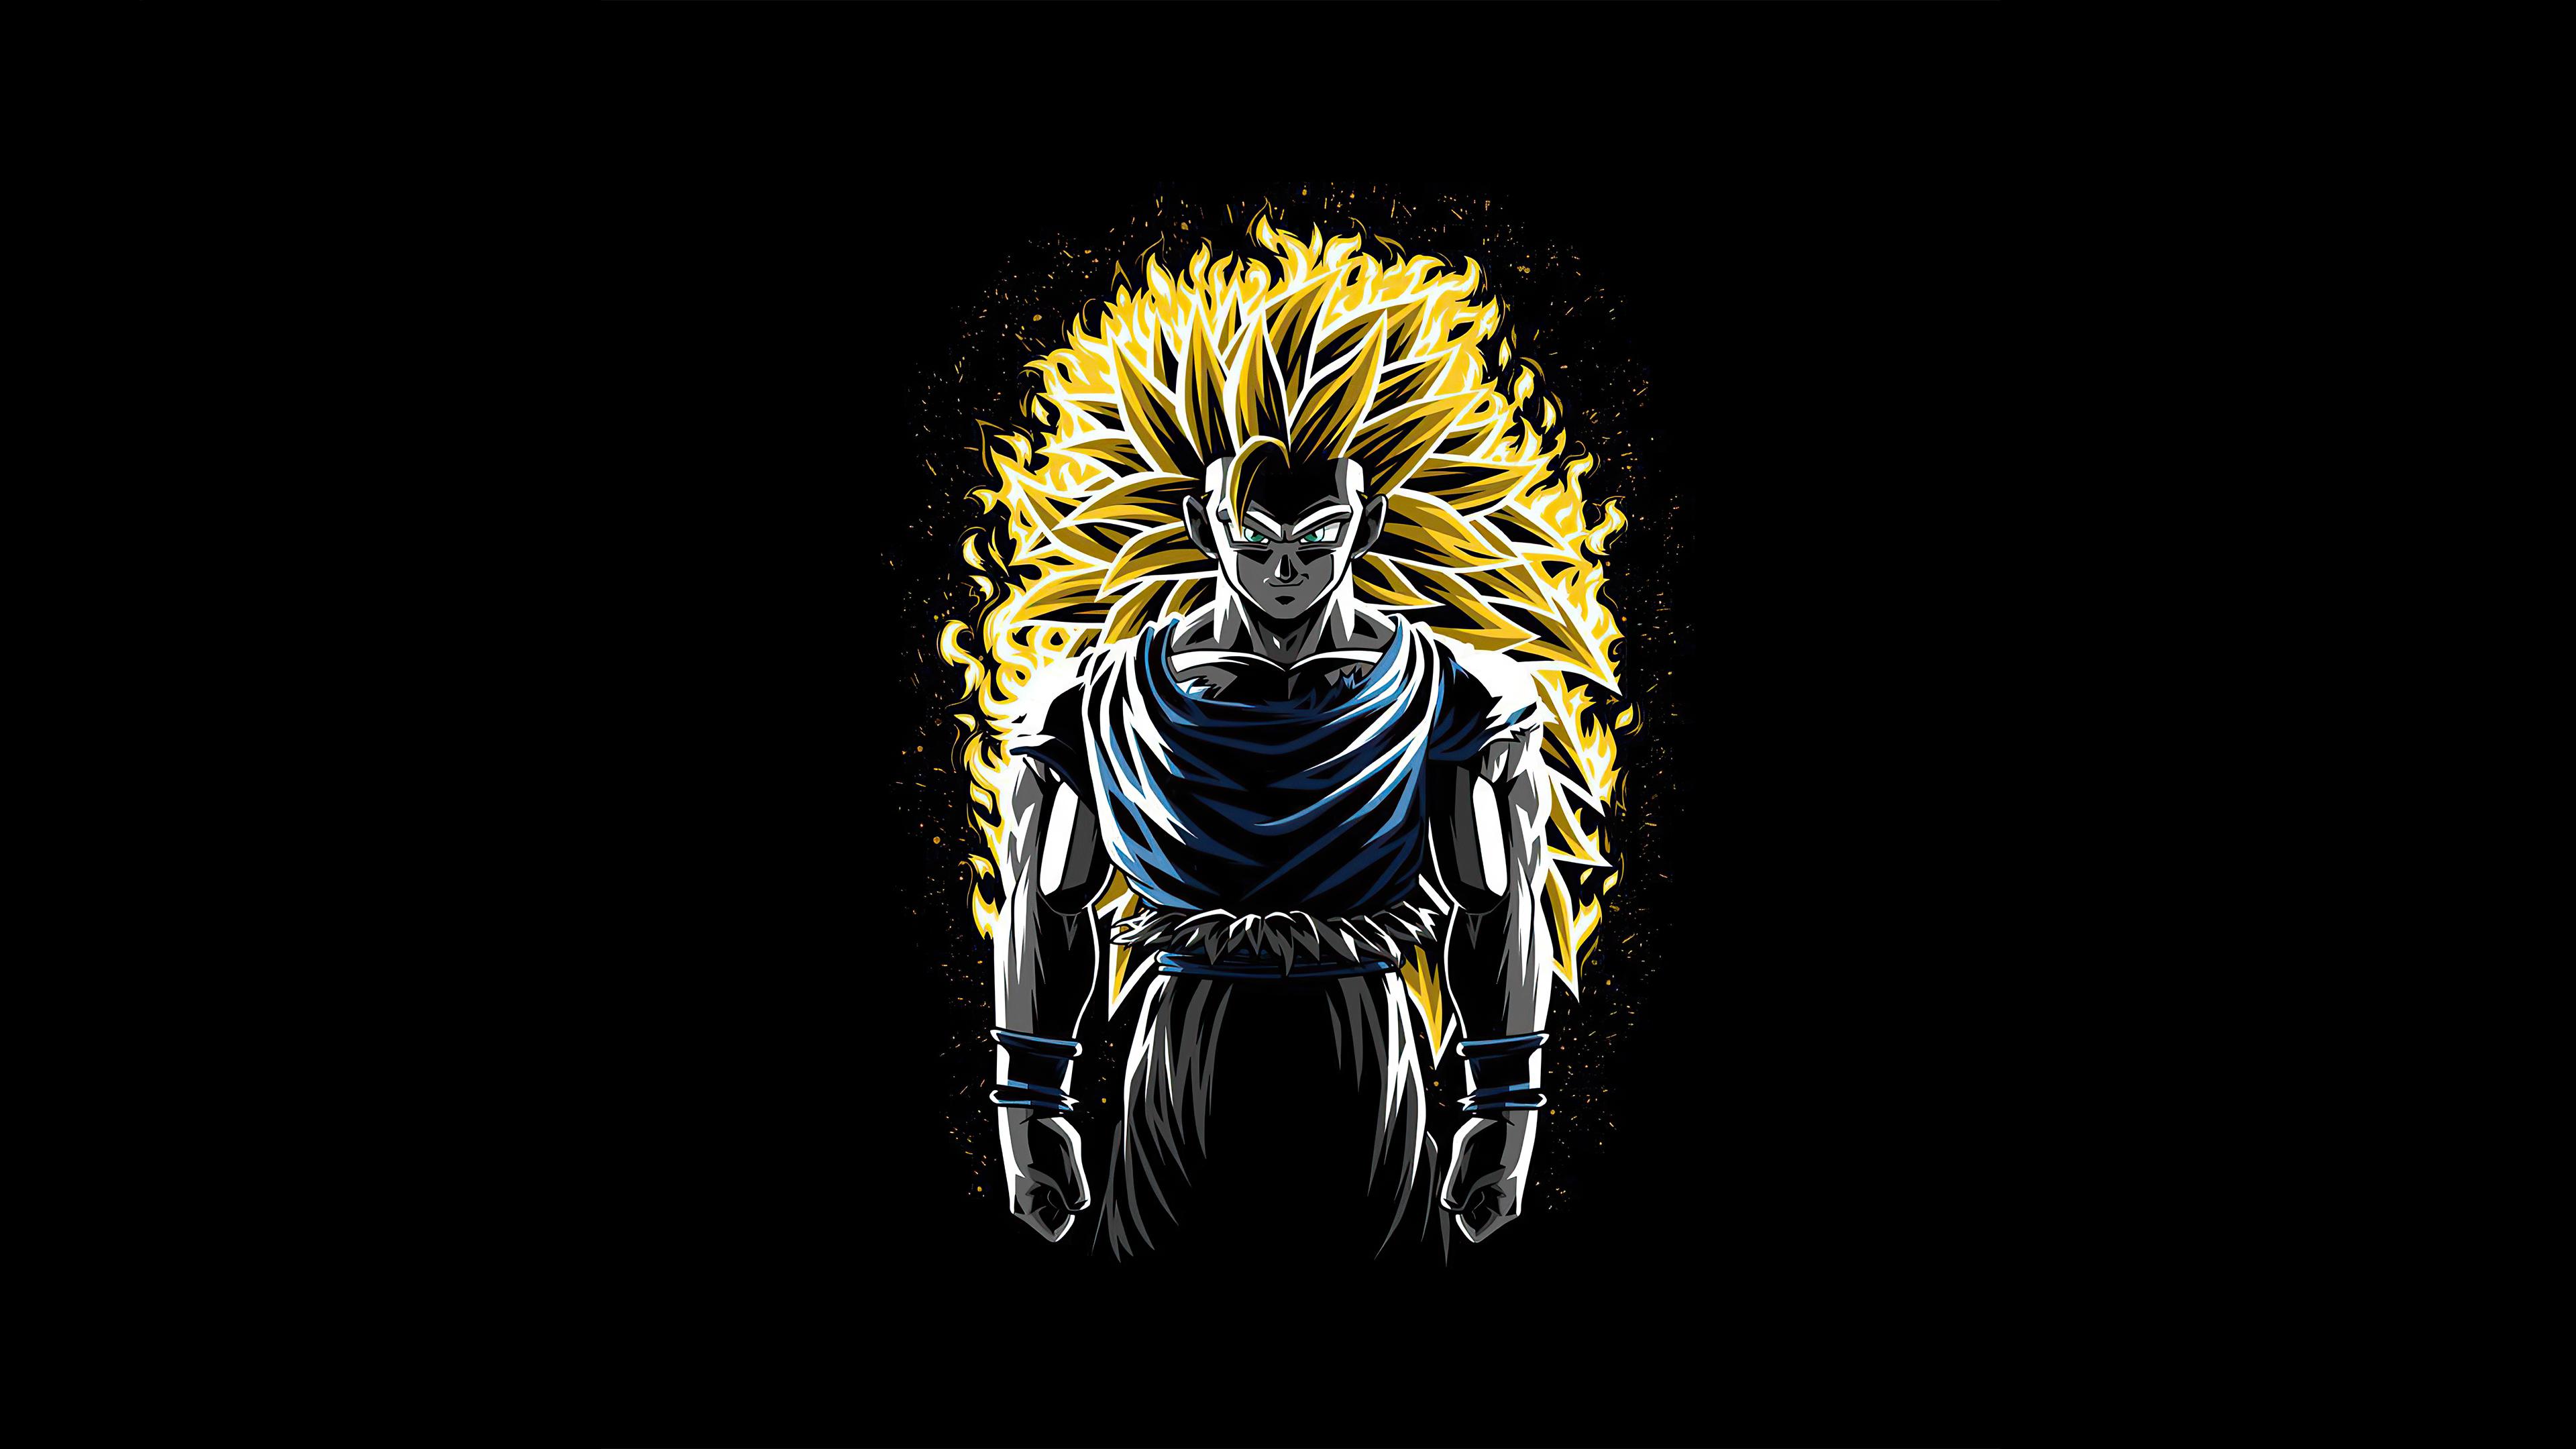 Battle Fire Super Saiyan 3 Goku Dragon Ball Z, HD Anime, 4k Wallpapers,  Images, Backgrounds, Photos and Pictures